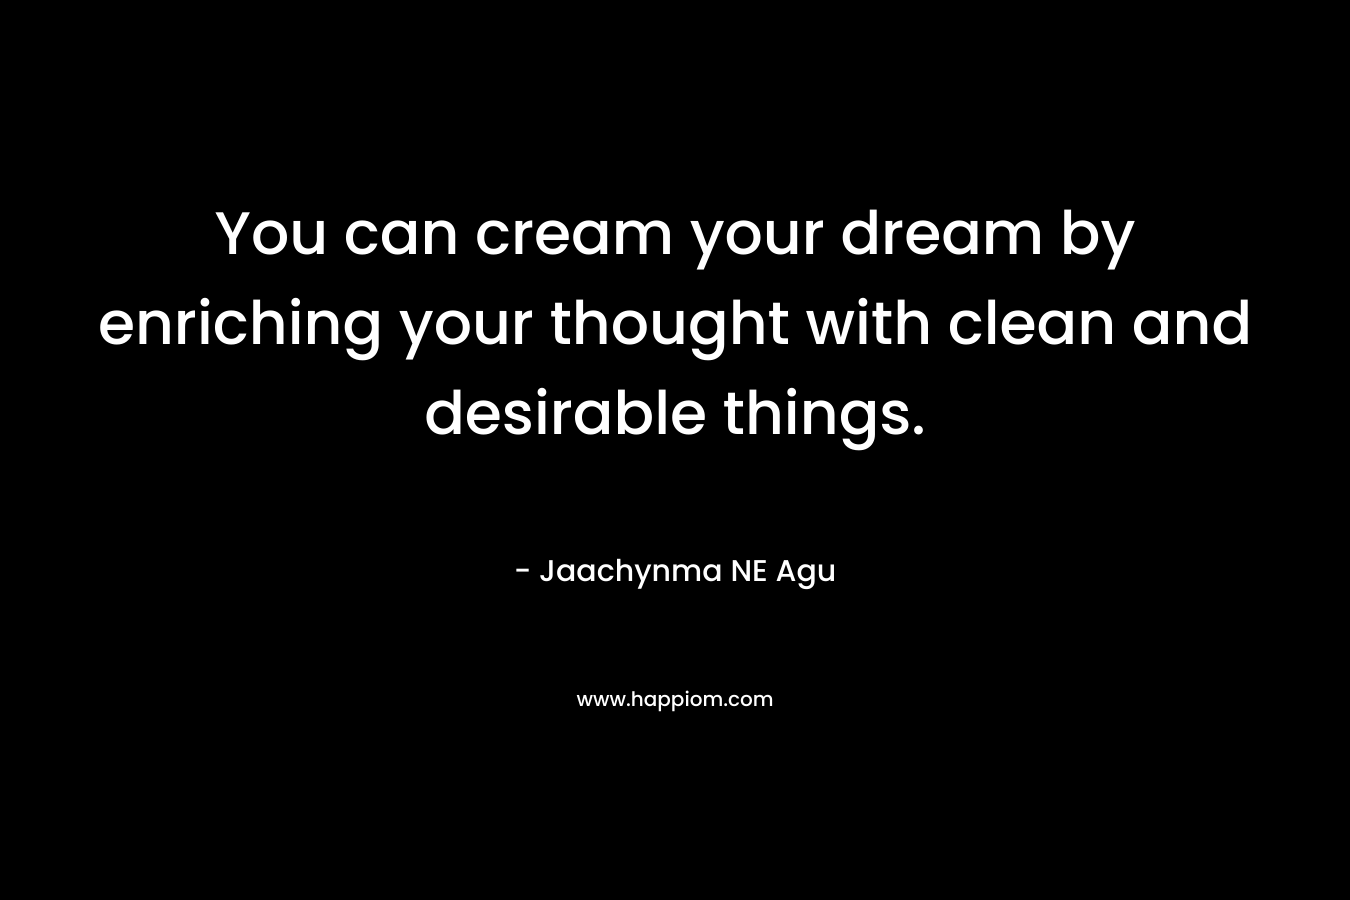 You can cream your dream by enriching your thought with clean and desirable things. – Jaachynma NE Agu